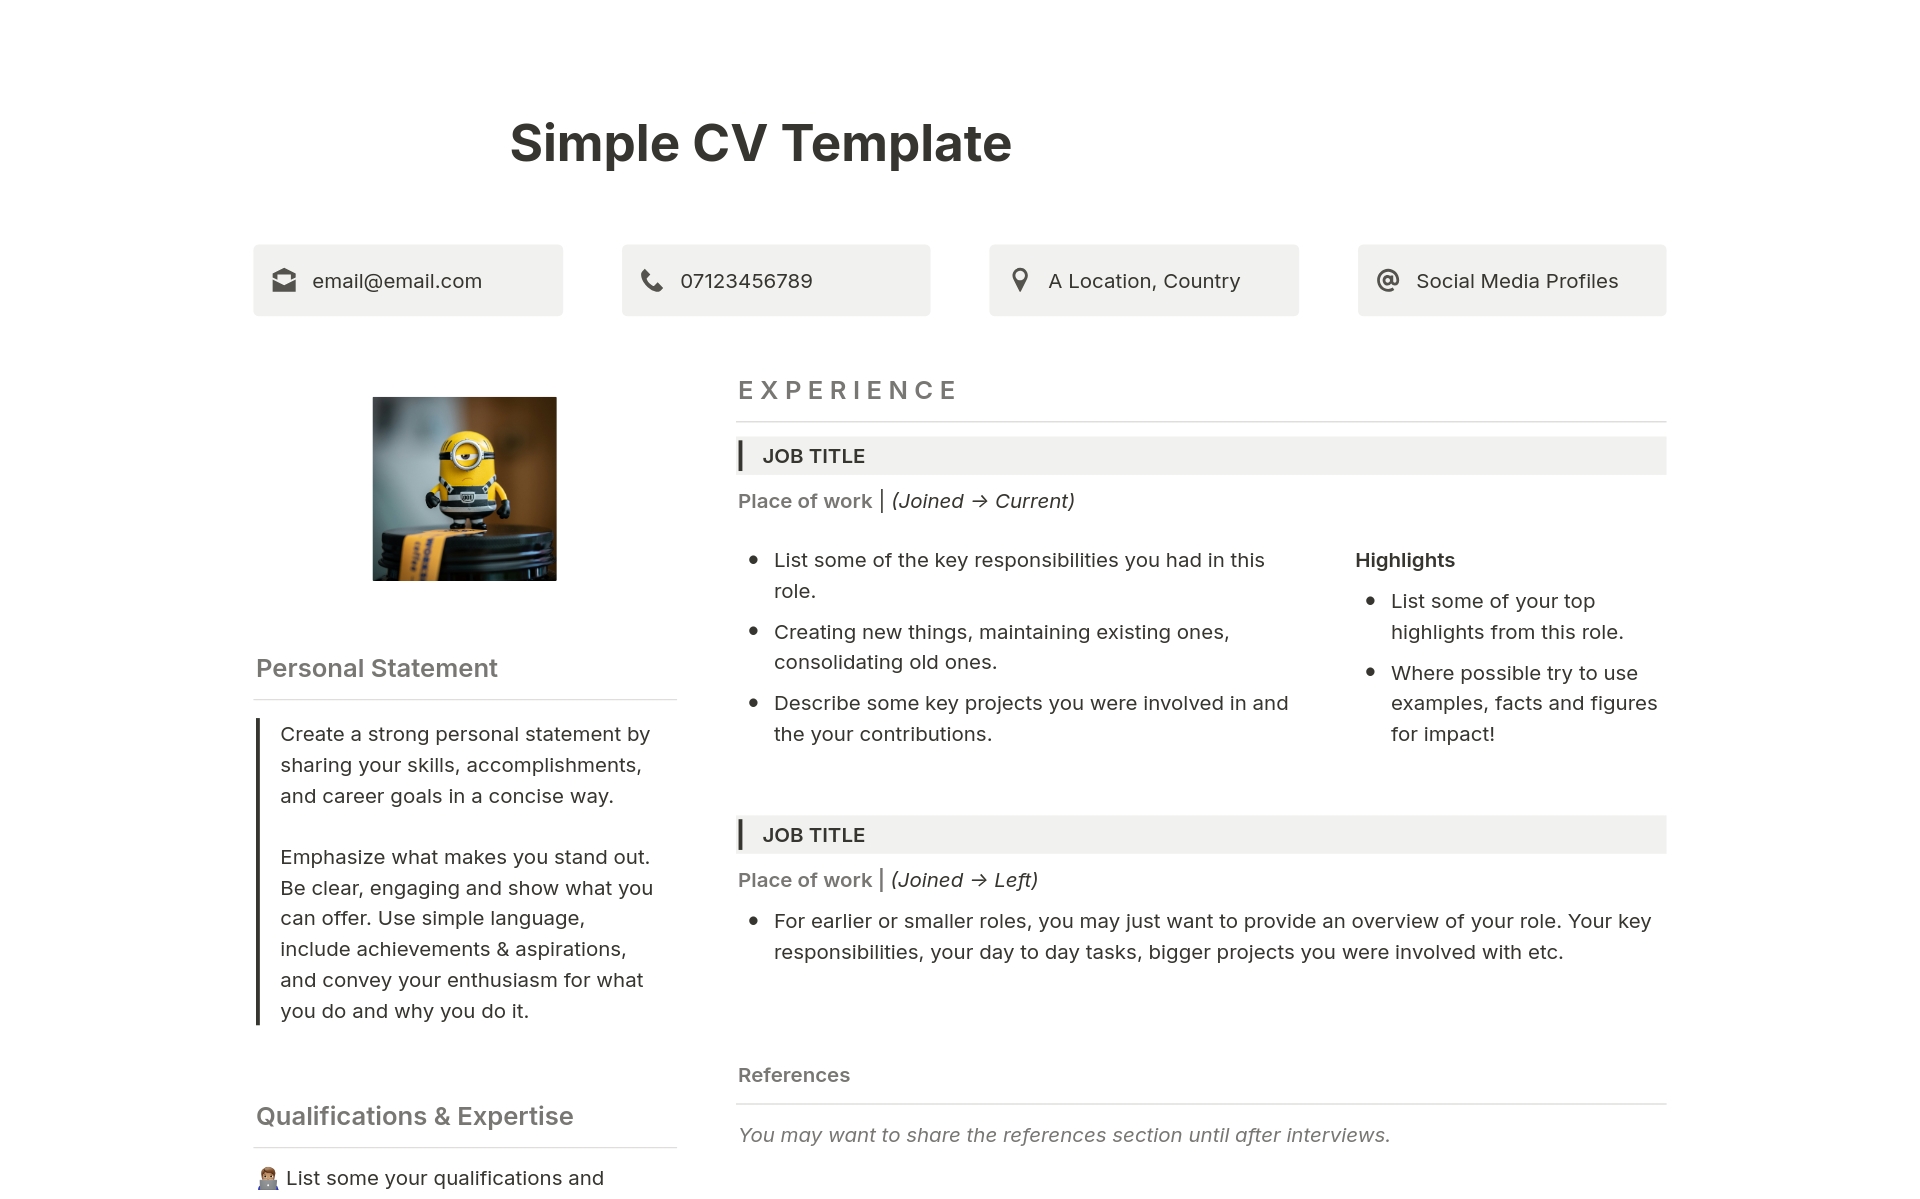 A template preview for Simple CV